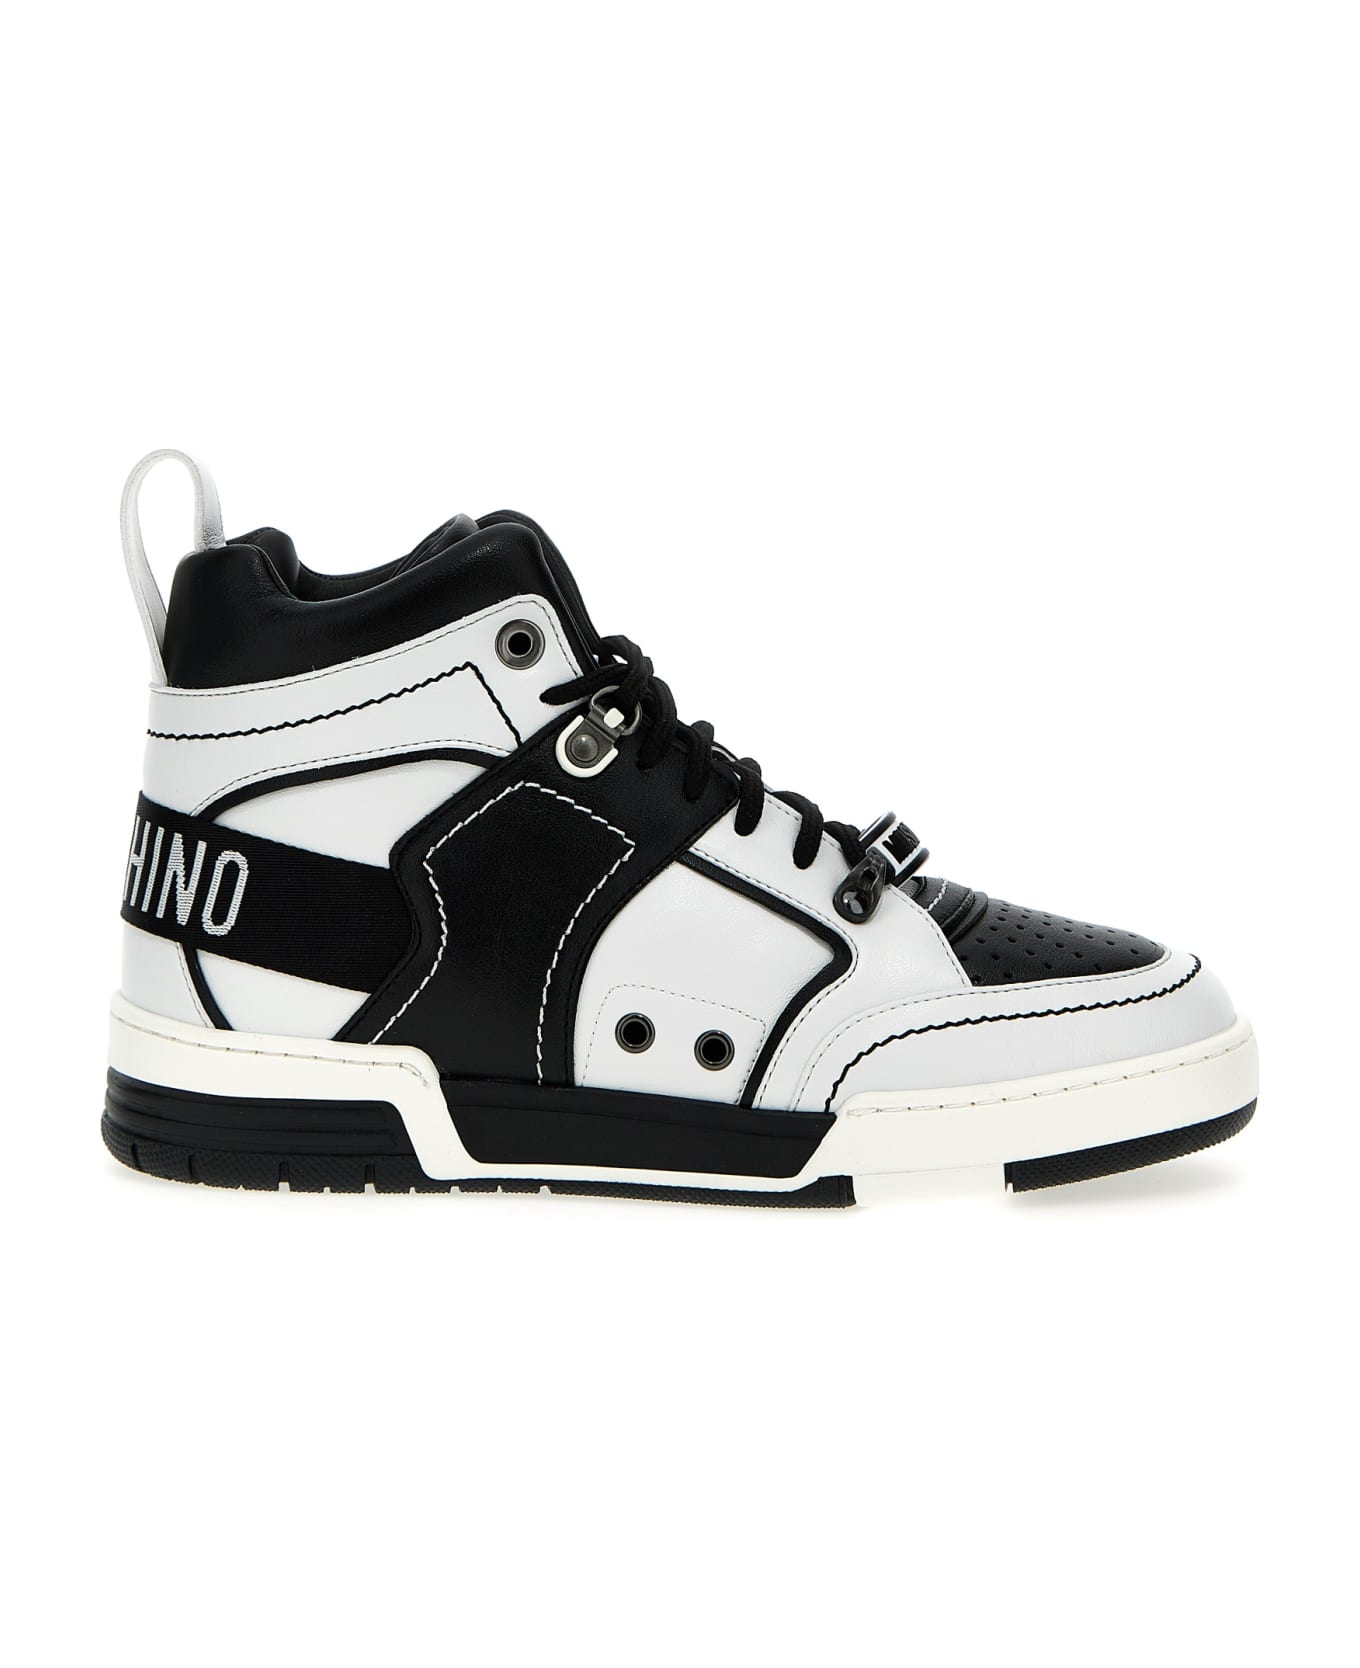 Moschino 'kevin' Sneakers - White/Black